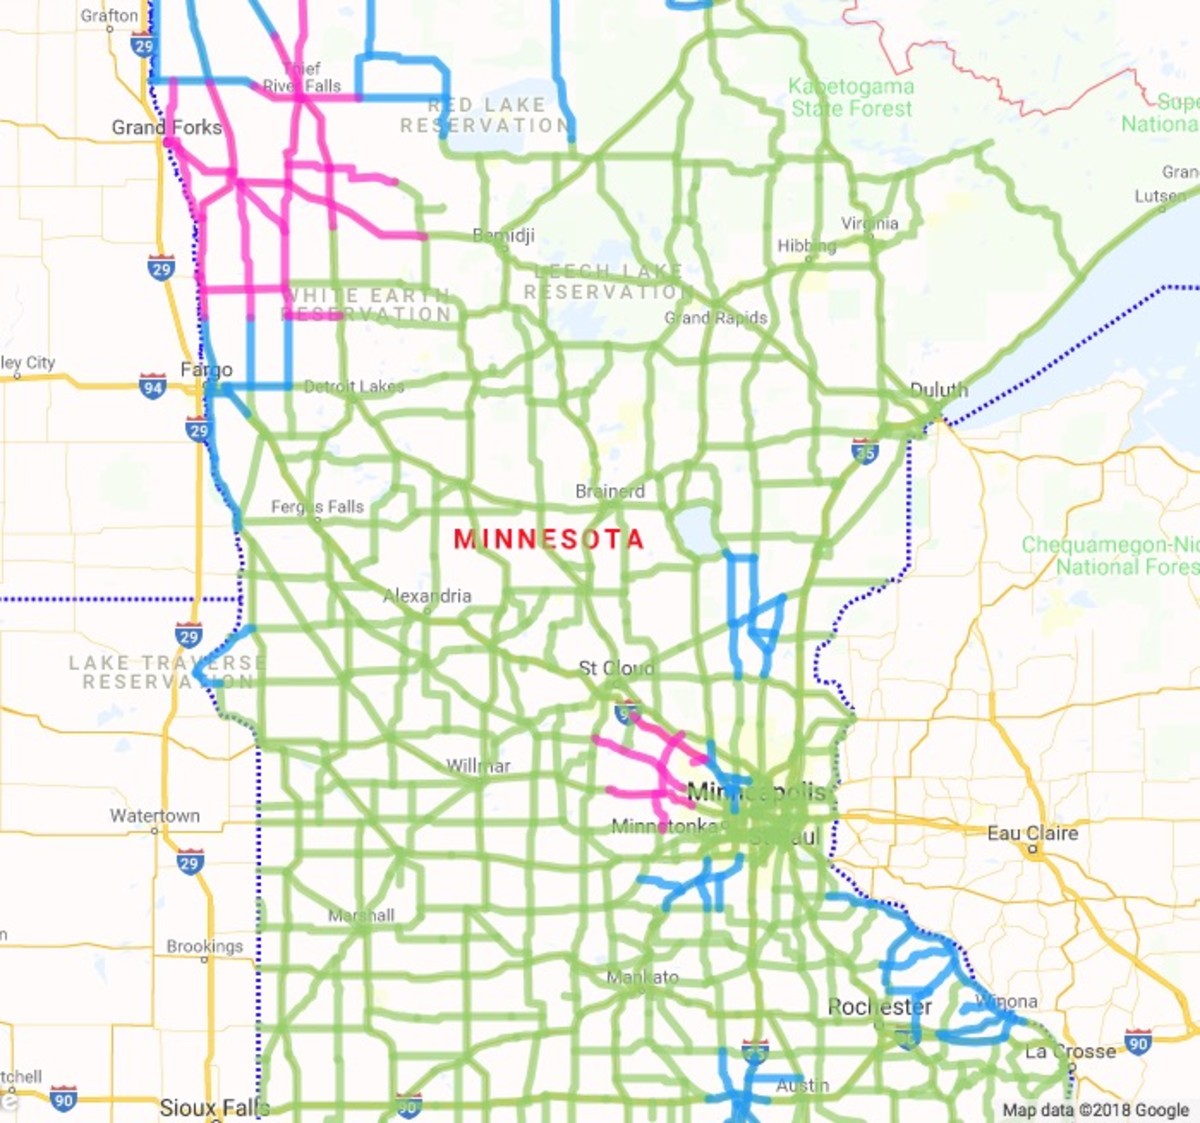 Pink means roads are completed covered and blue represents roads partially covered. 